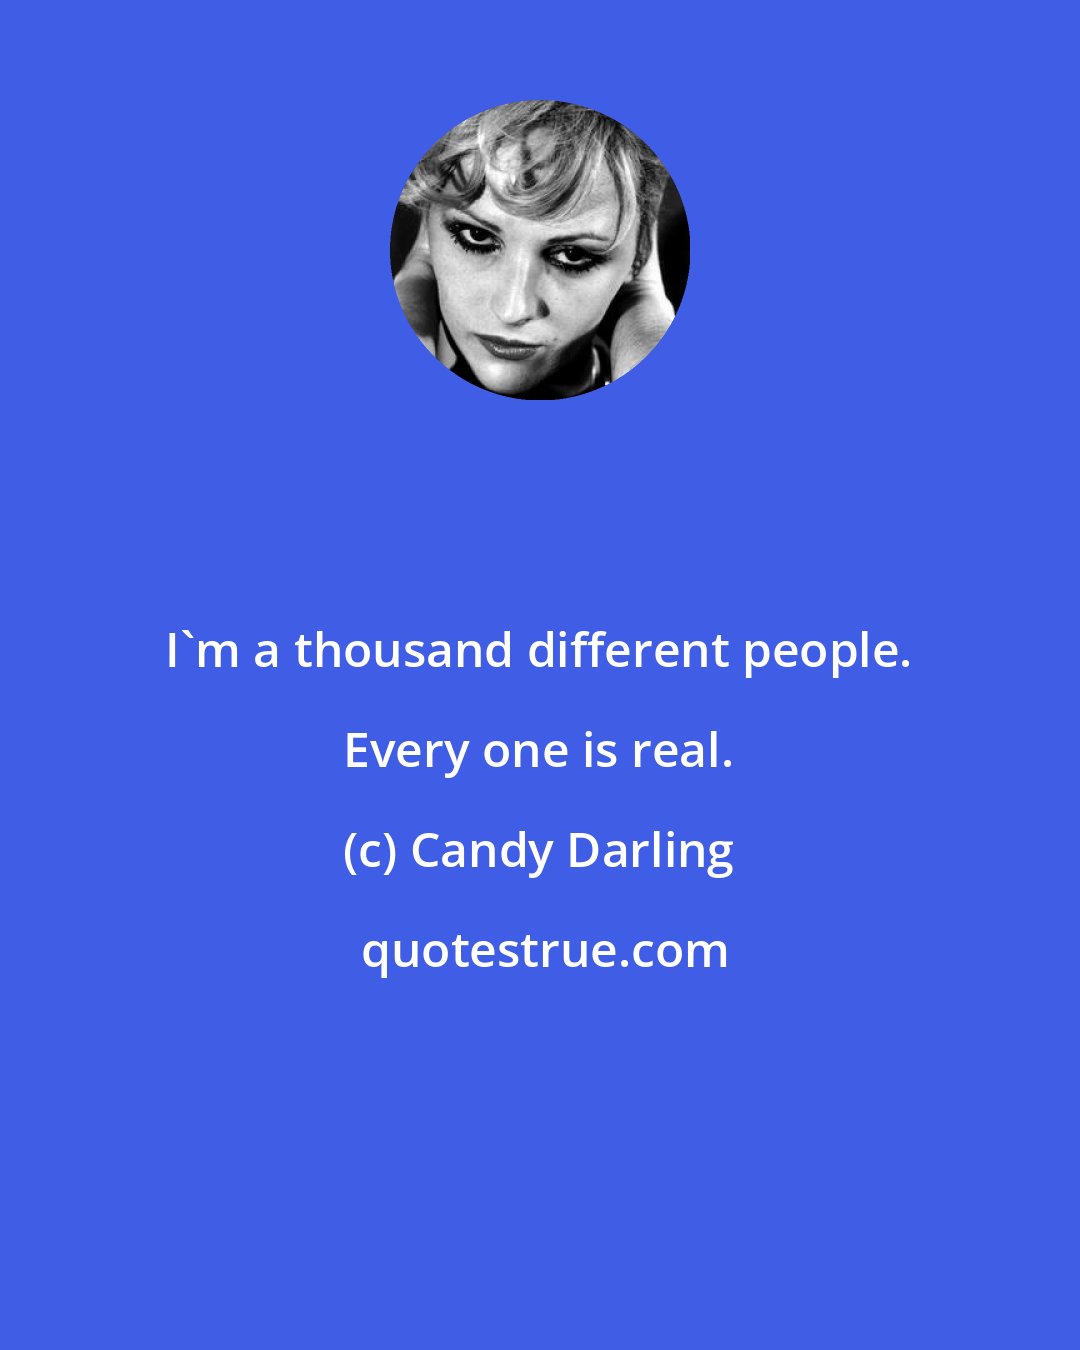 Candy Darling: I'm a thousand different people. Every one is real.